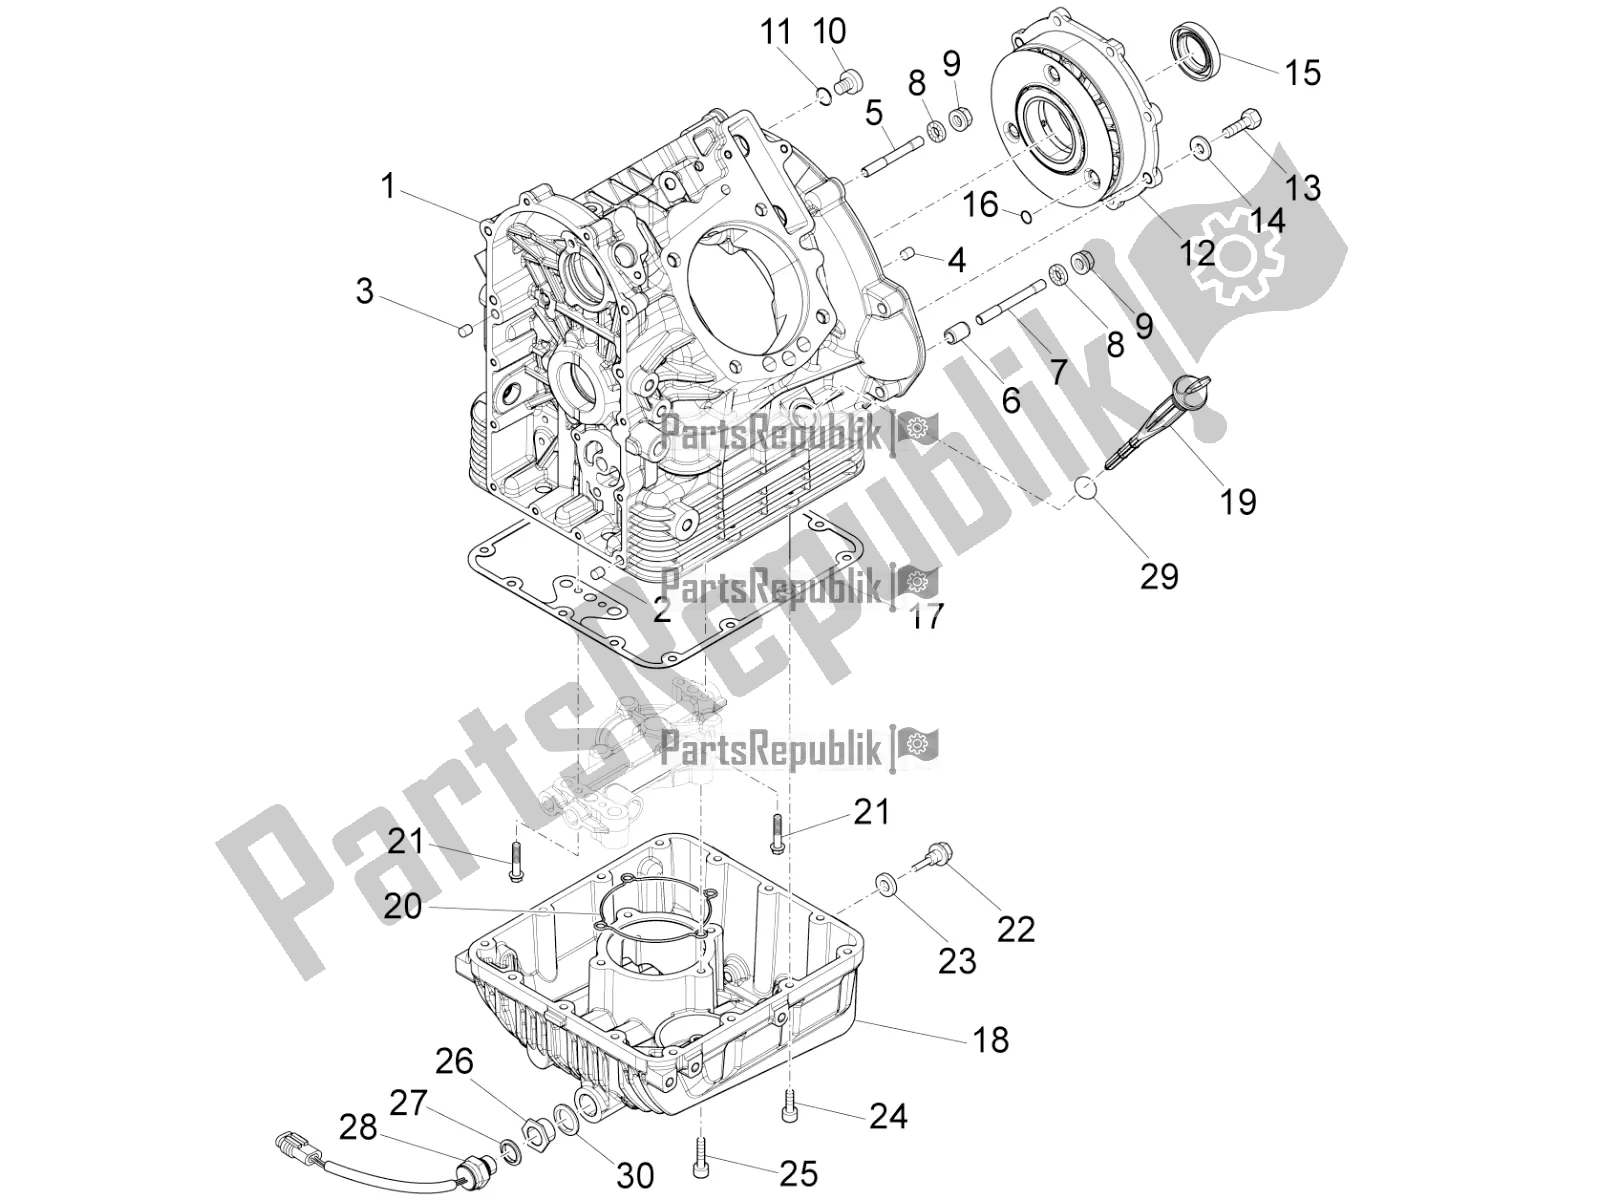 All parts for the Crankcases I of the Moto-Guzzi California 1400 Touring ABS Apac 2018